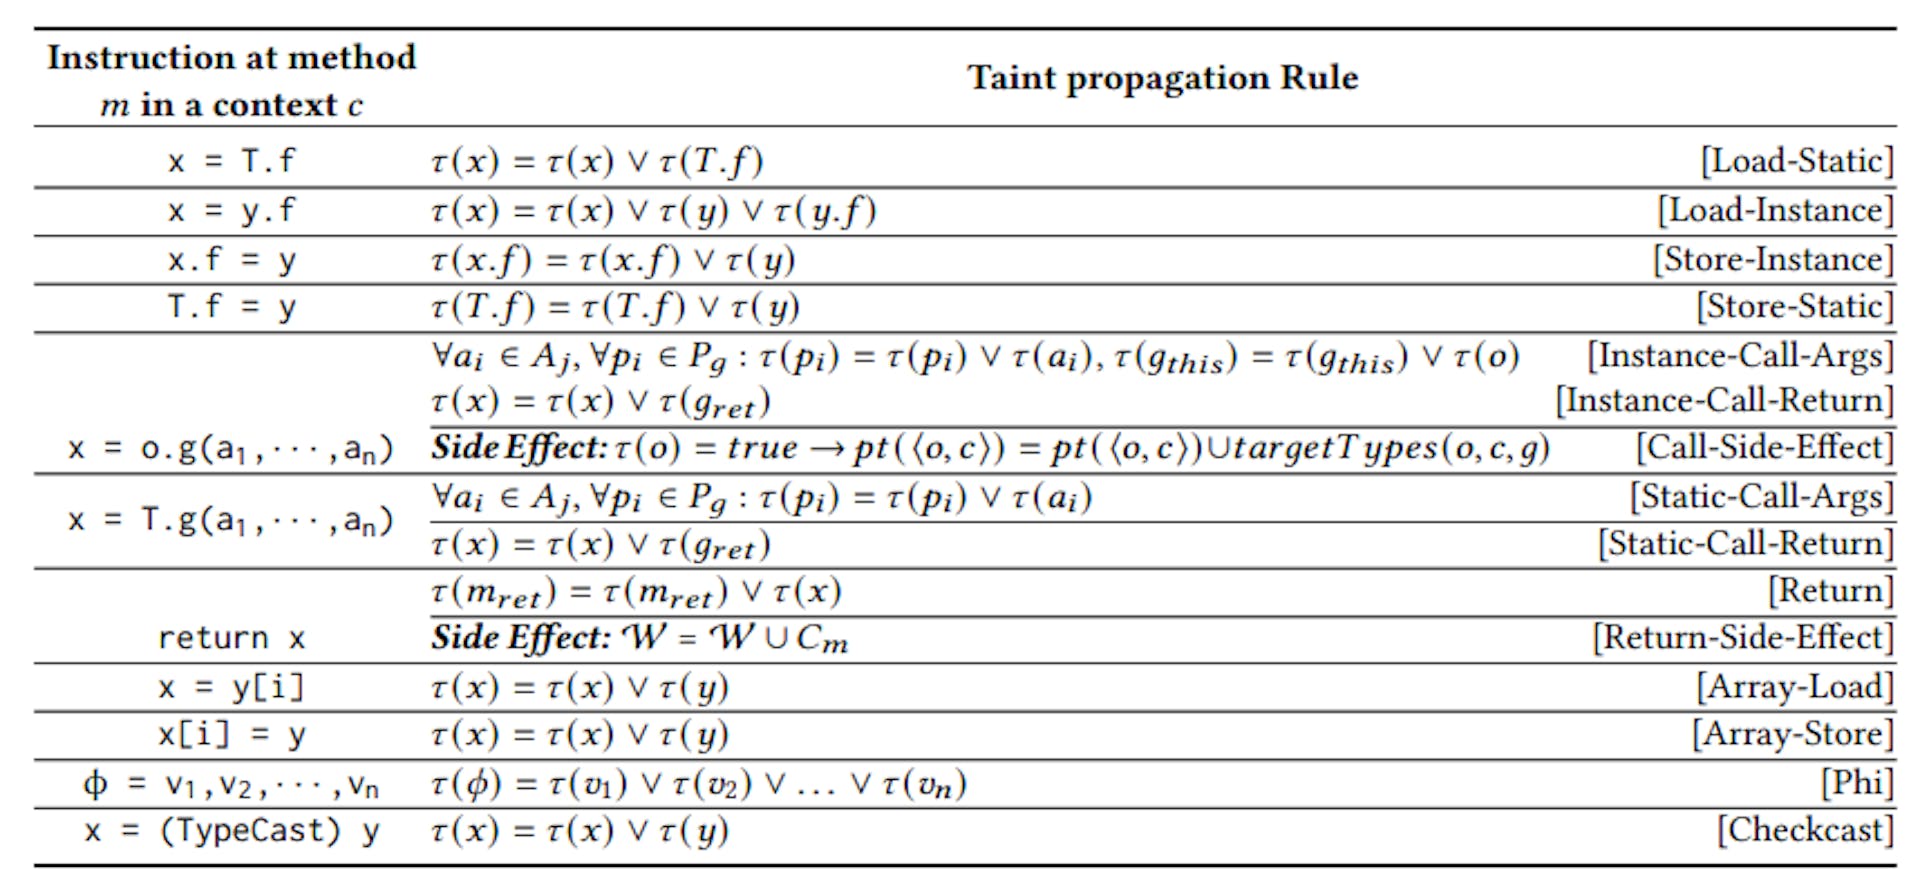 Table 1. Taint propagation rules employed by Seneca when building call graphs.